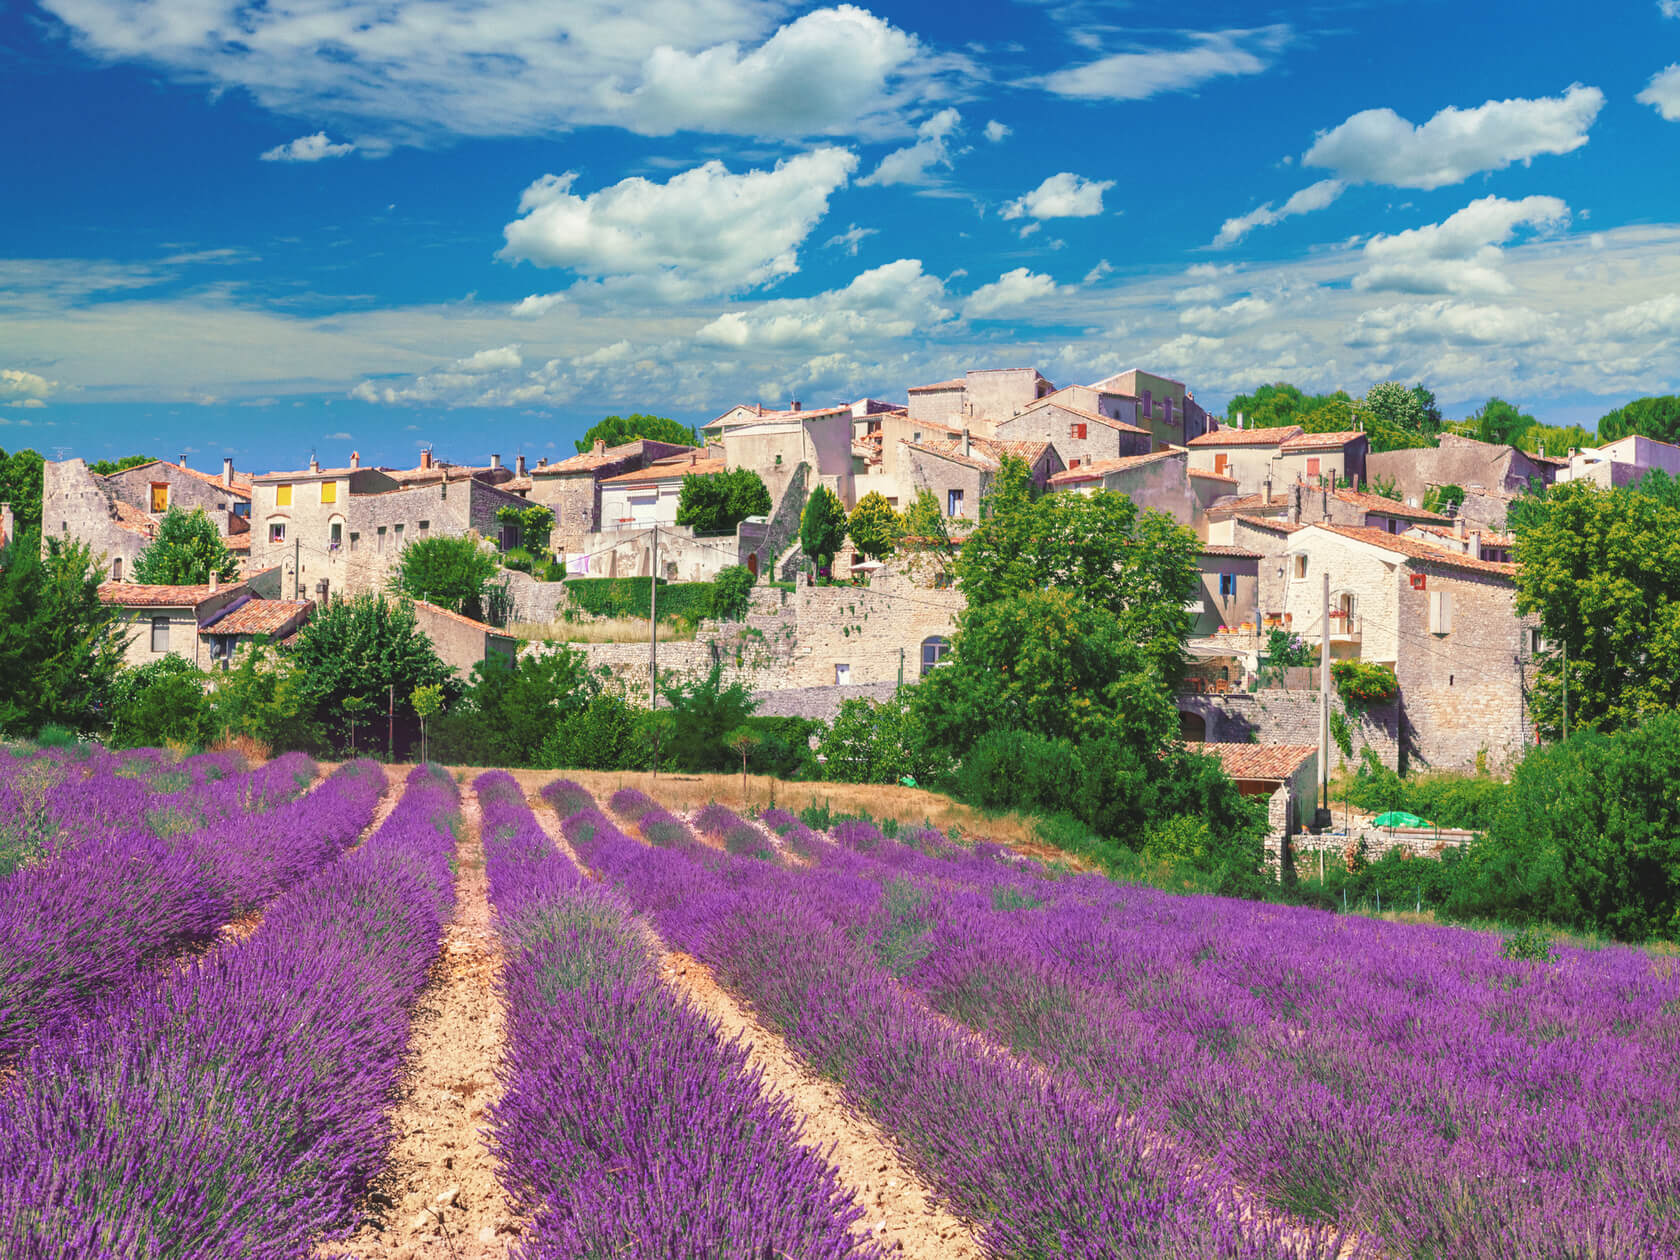 Lavender Fields. Town of Cereste in Provence, France 